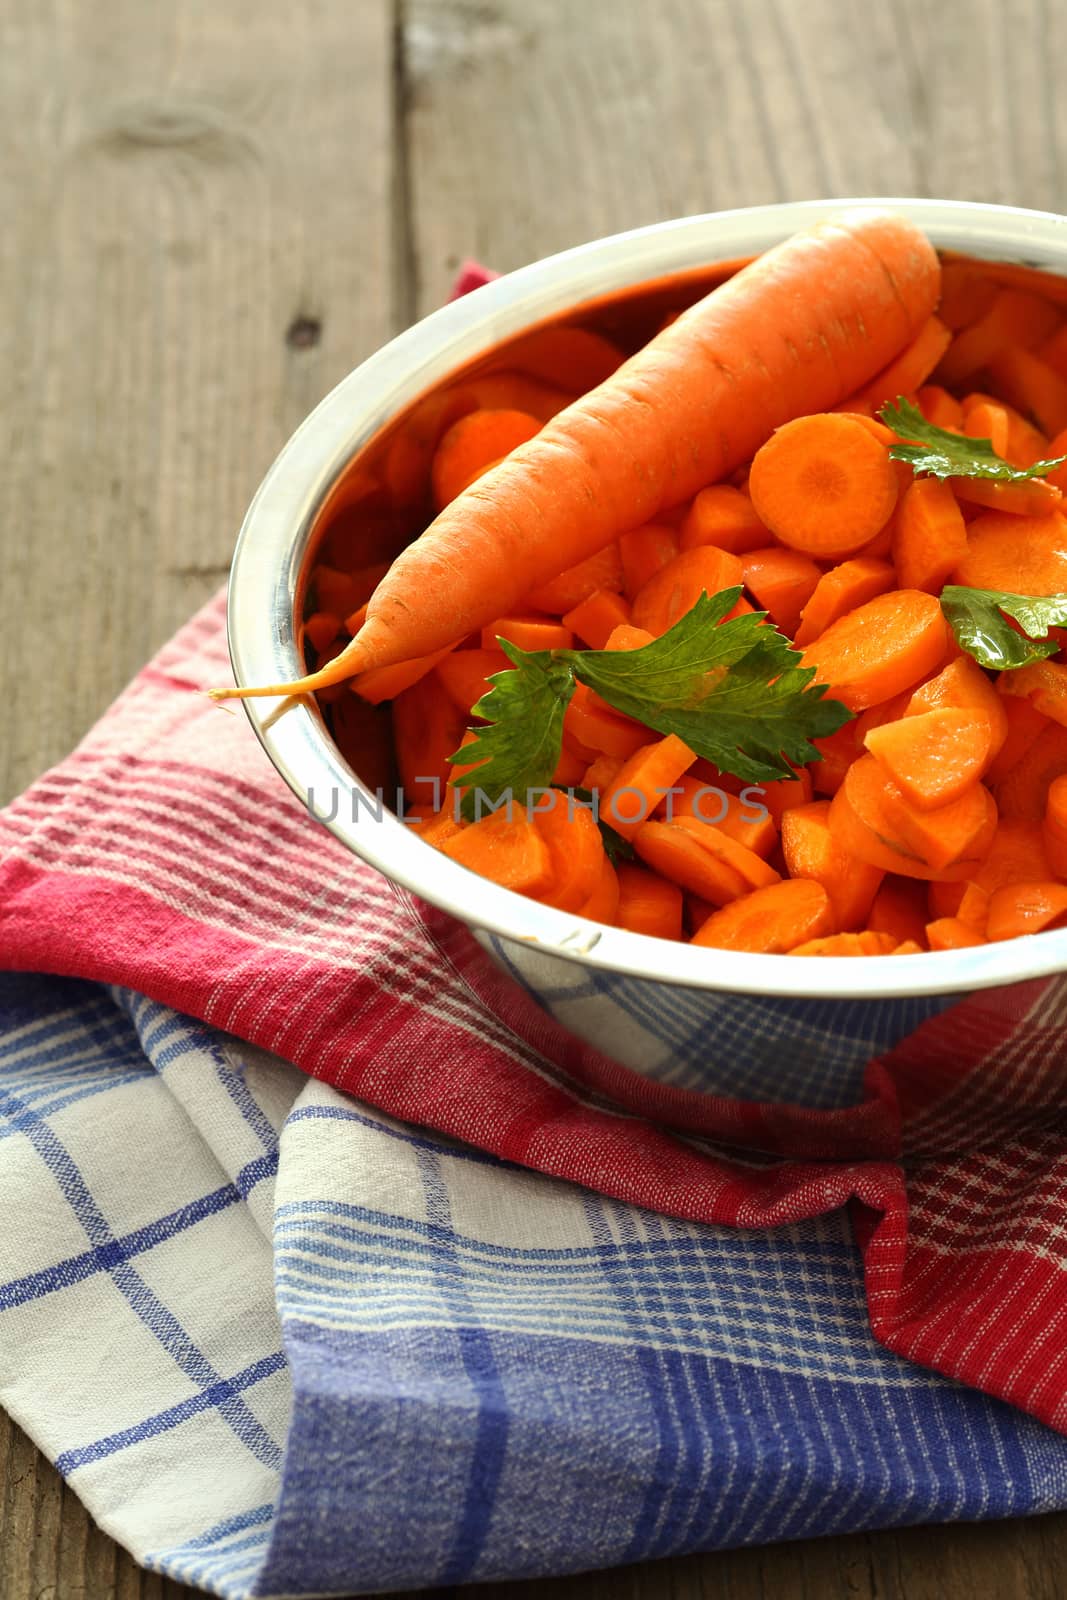 chopped carrots in bowl of steel , shallow dof 